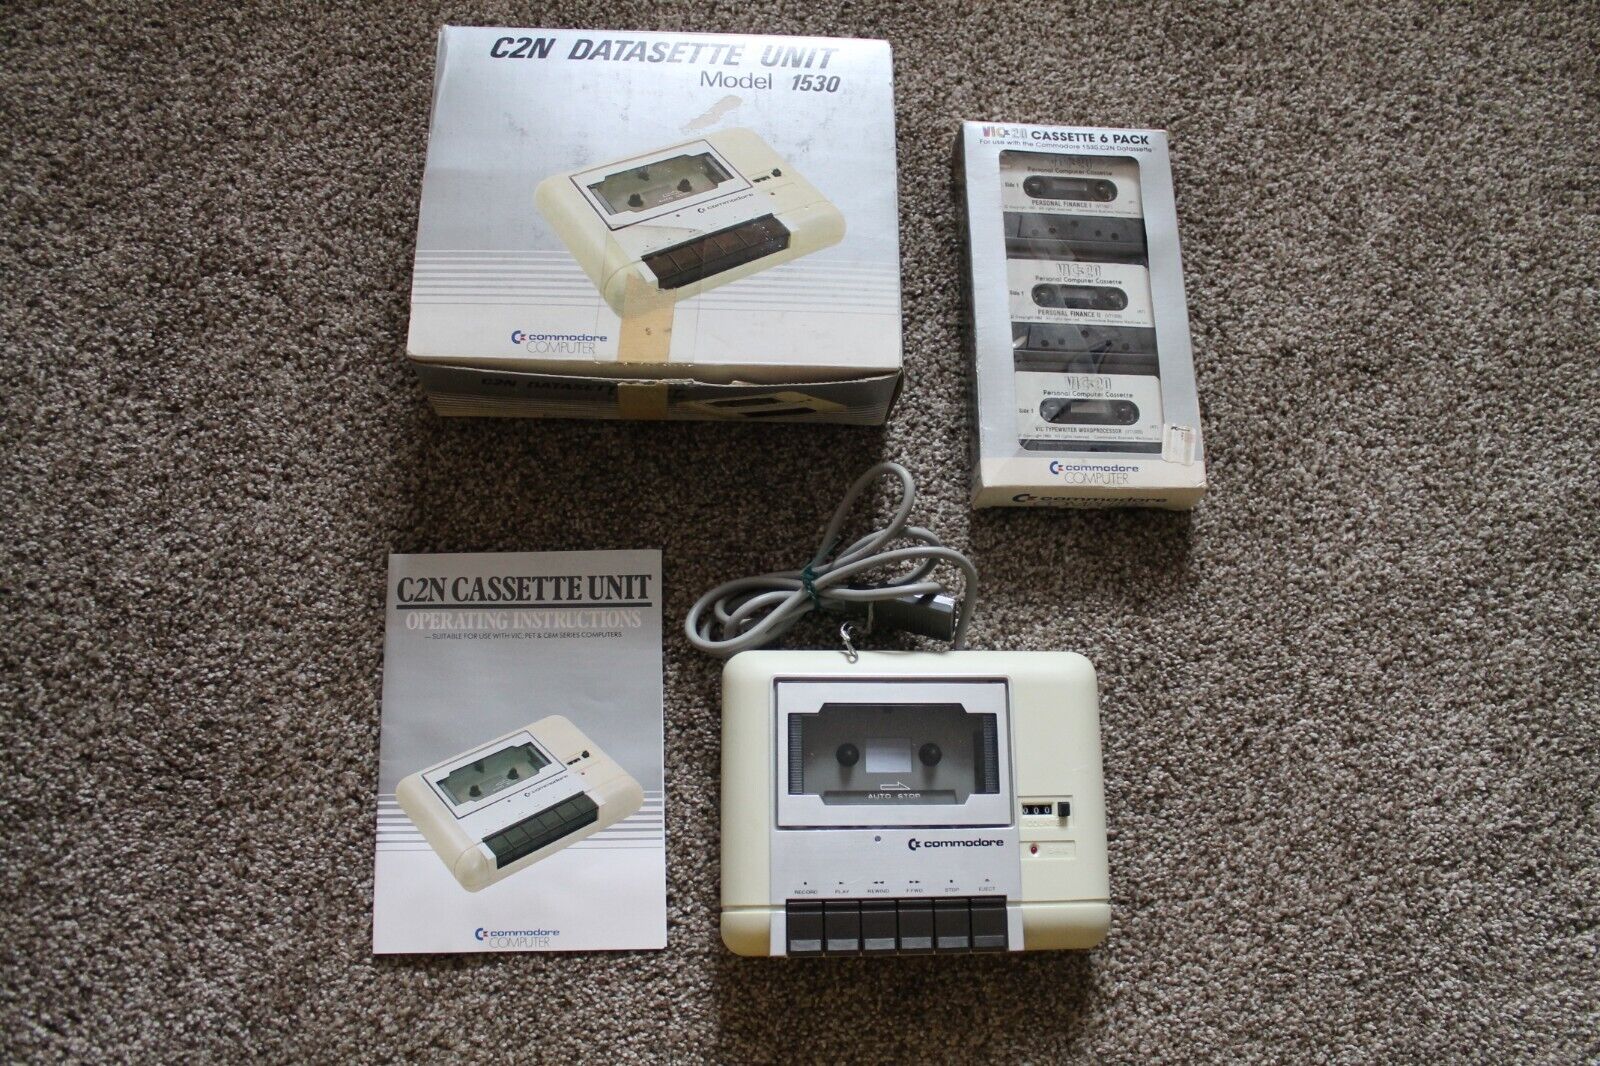 Commodore Vintage C2N 1530 Cassette Unit Datasette Recorder for VIC-20 and Tapes